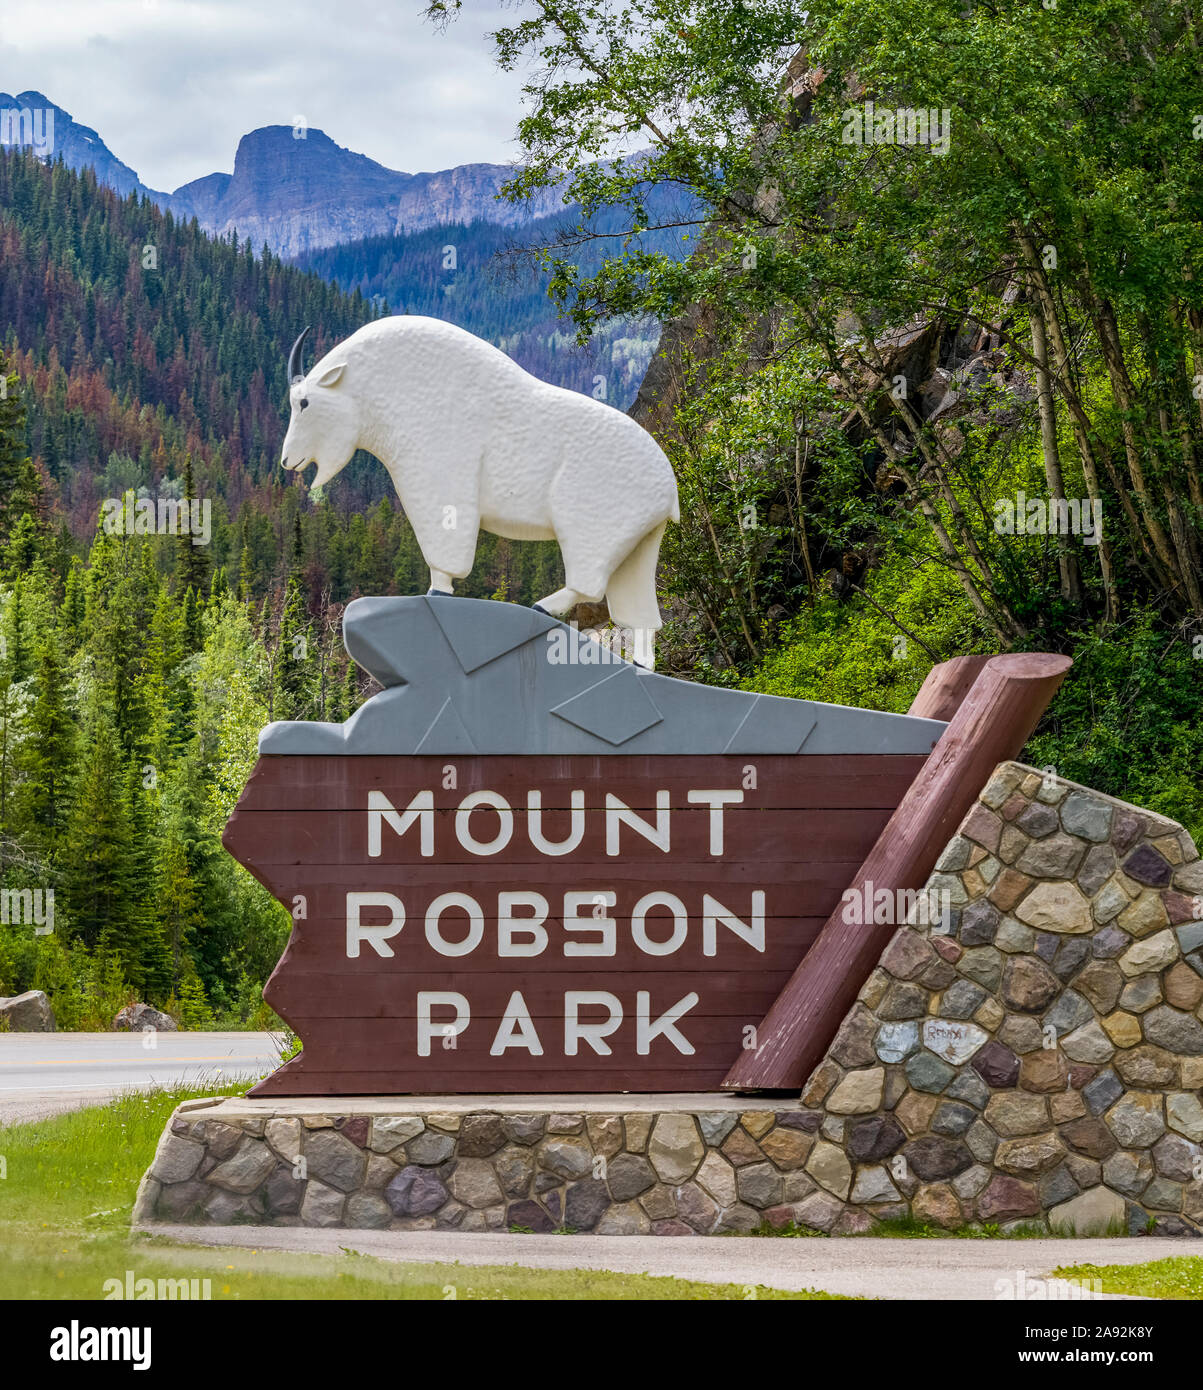 Sign for Mount Robson Park in the Canadian Rocky Mountains; British Columbia, Canada Stock Photo